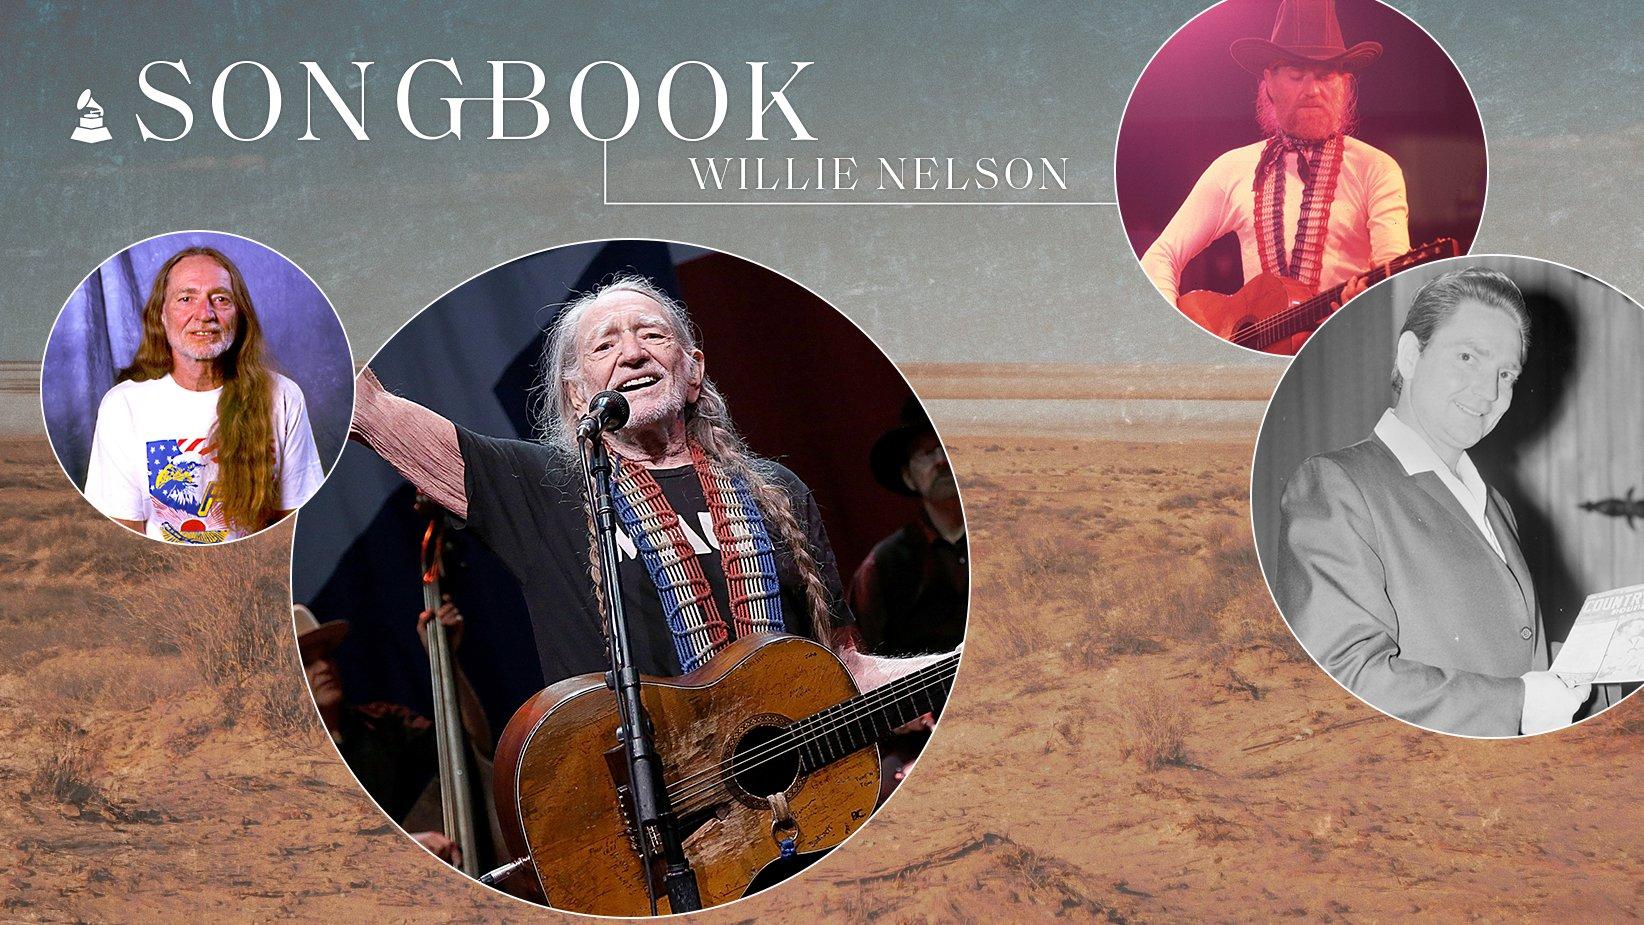 Photos of Willie Nelson throughout the decades for Songbook series on GRAMMY.com